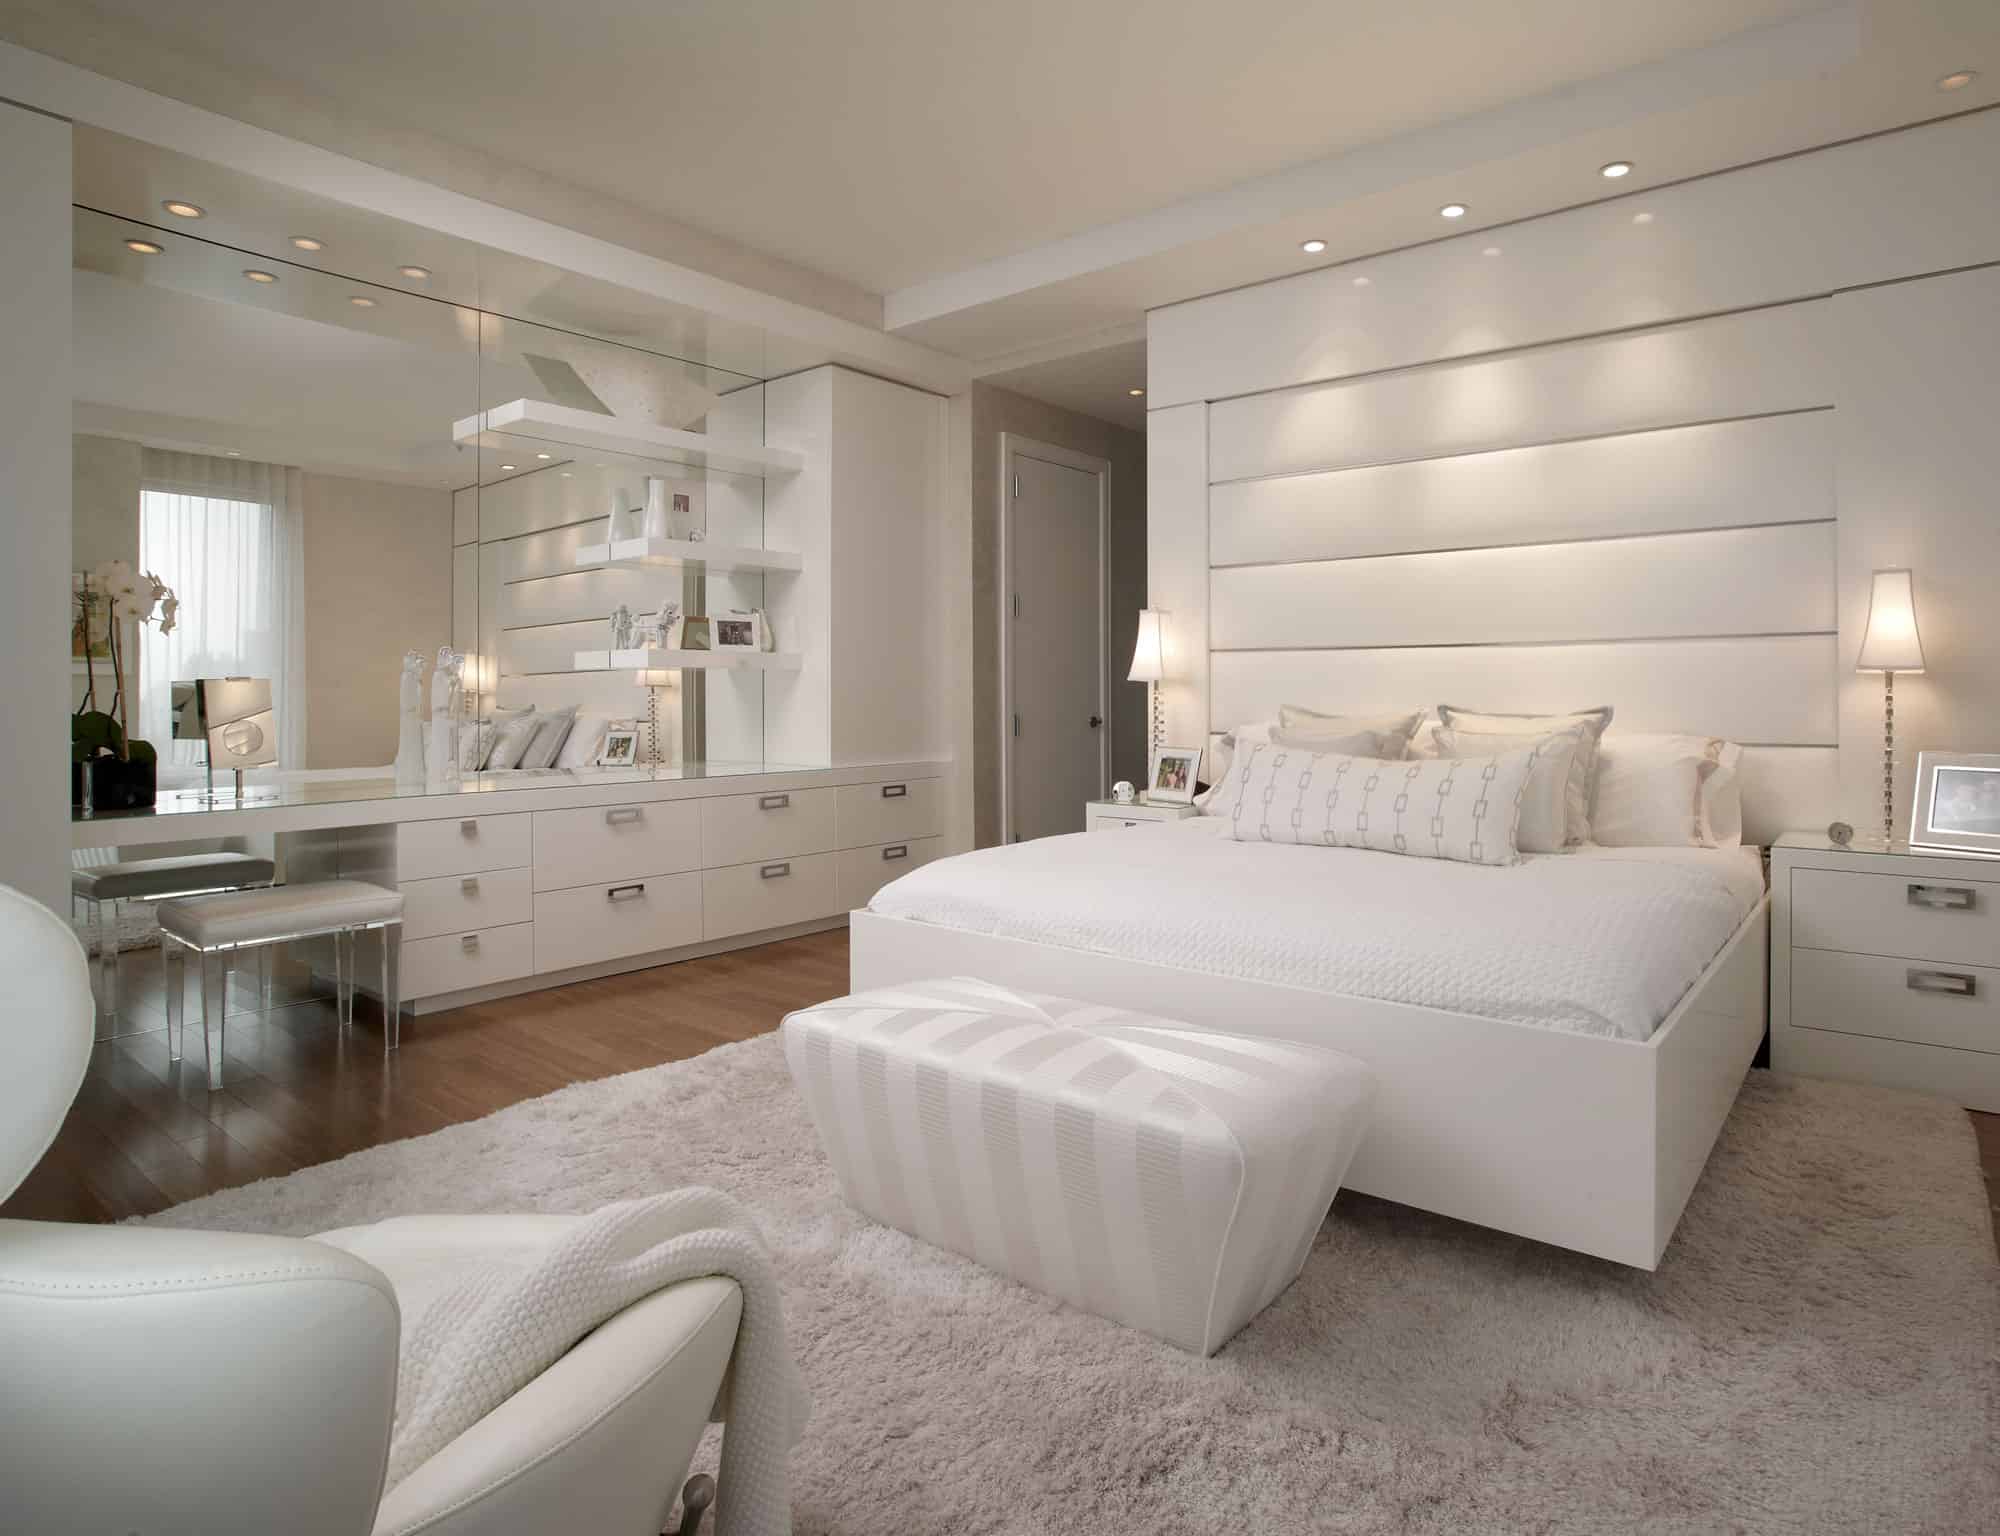 A great way to match your furniture to your wall is to have an all-white bedroom.